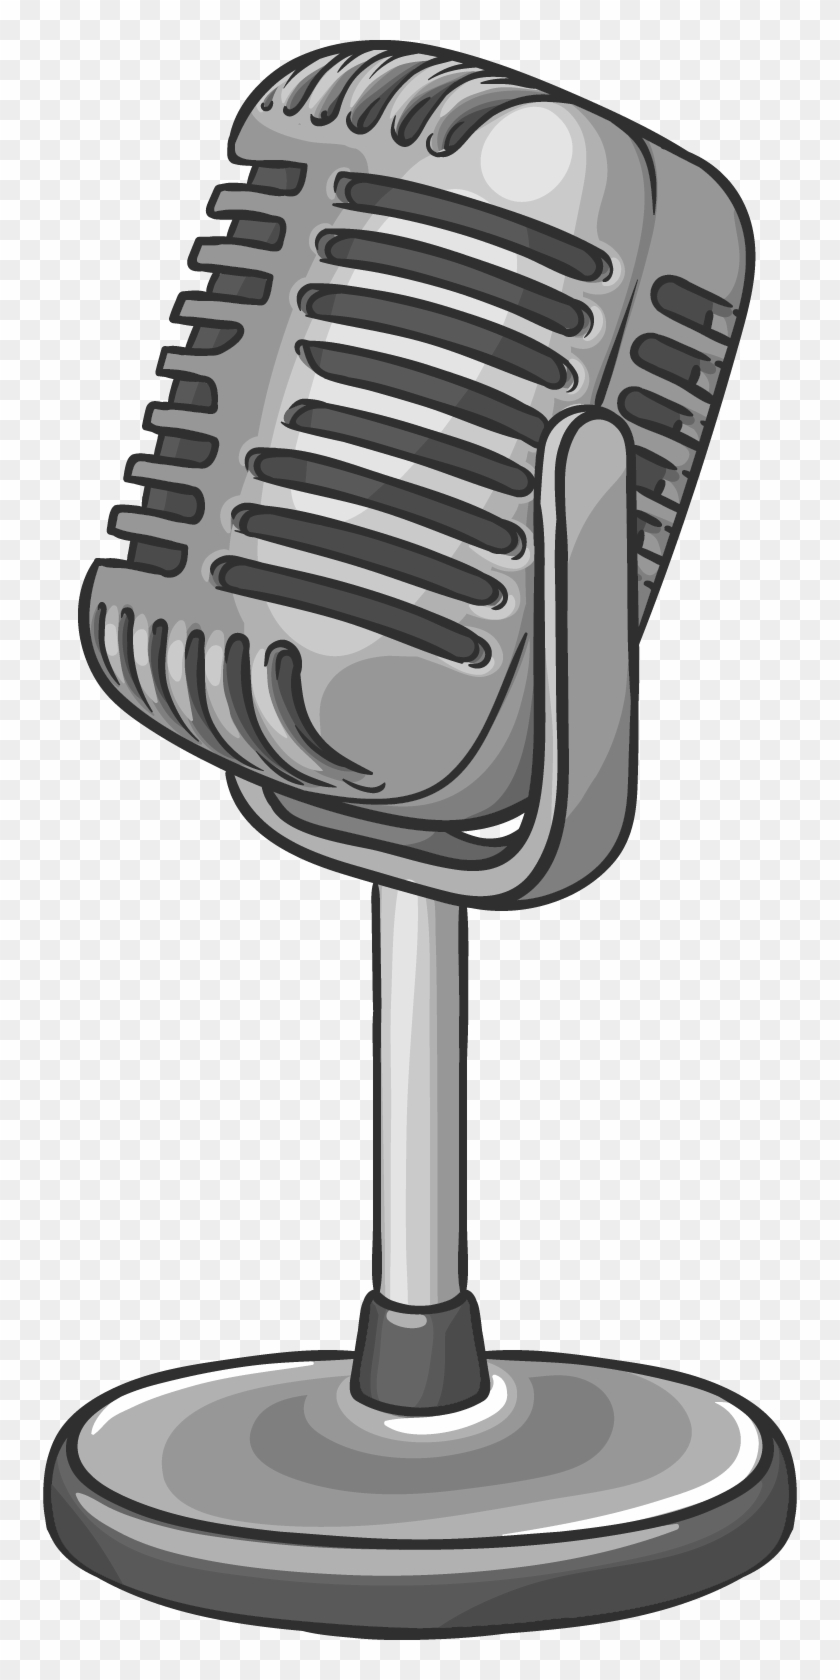 Microphone Icon Cartoon Hand - Microphone Cartoon Drawing, HD Png Download  - 754x1600(#6147106) - PngFind